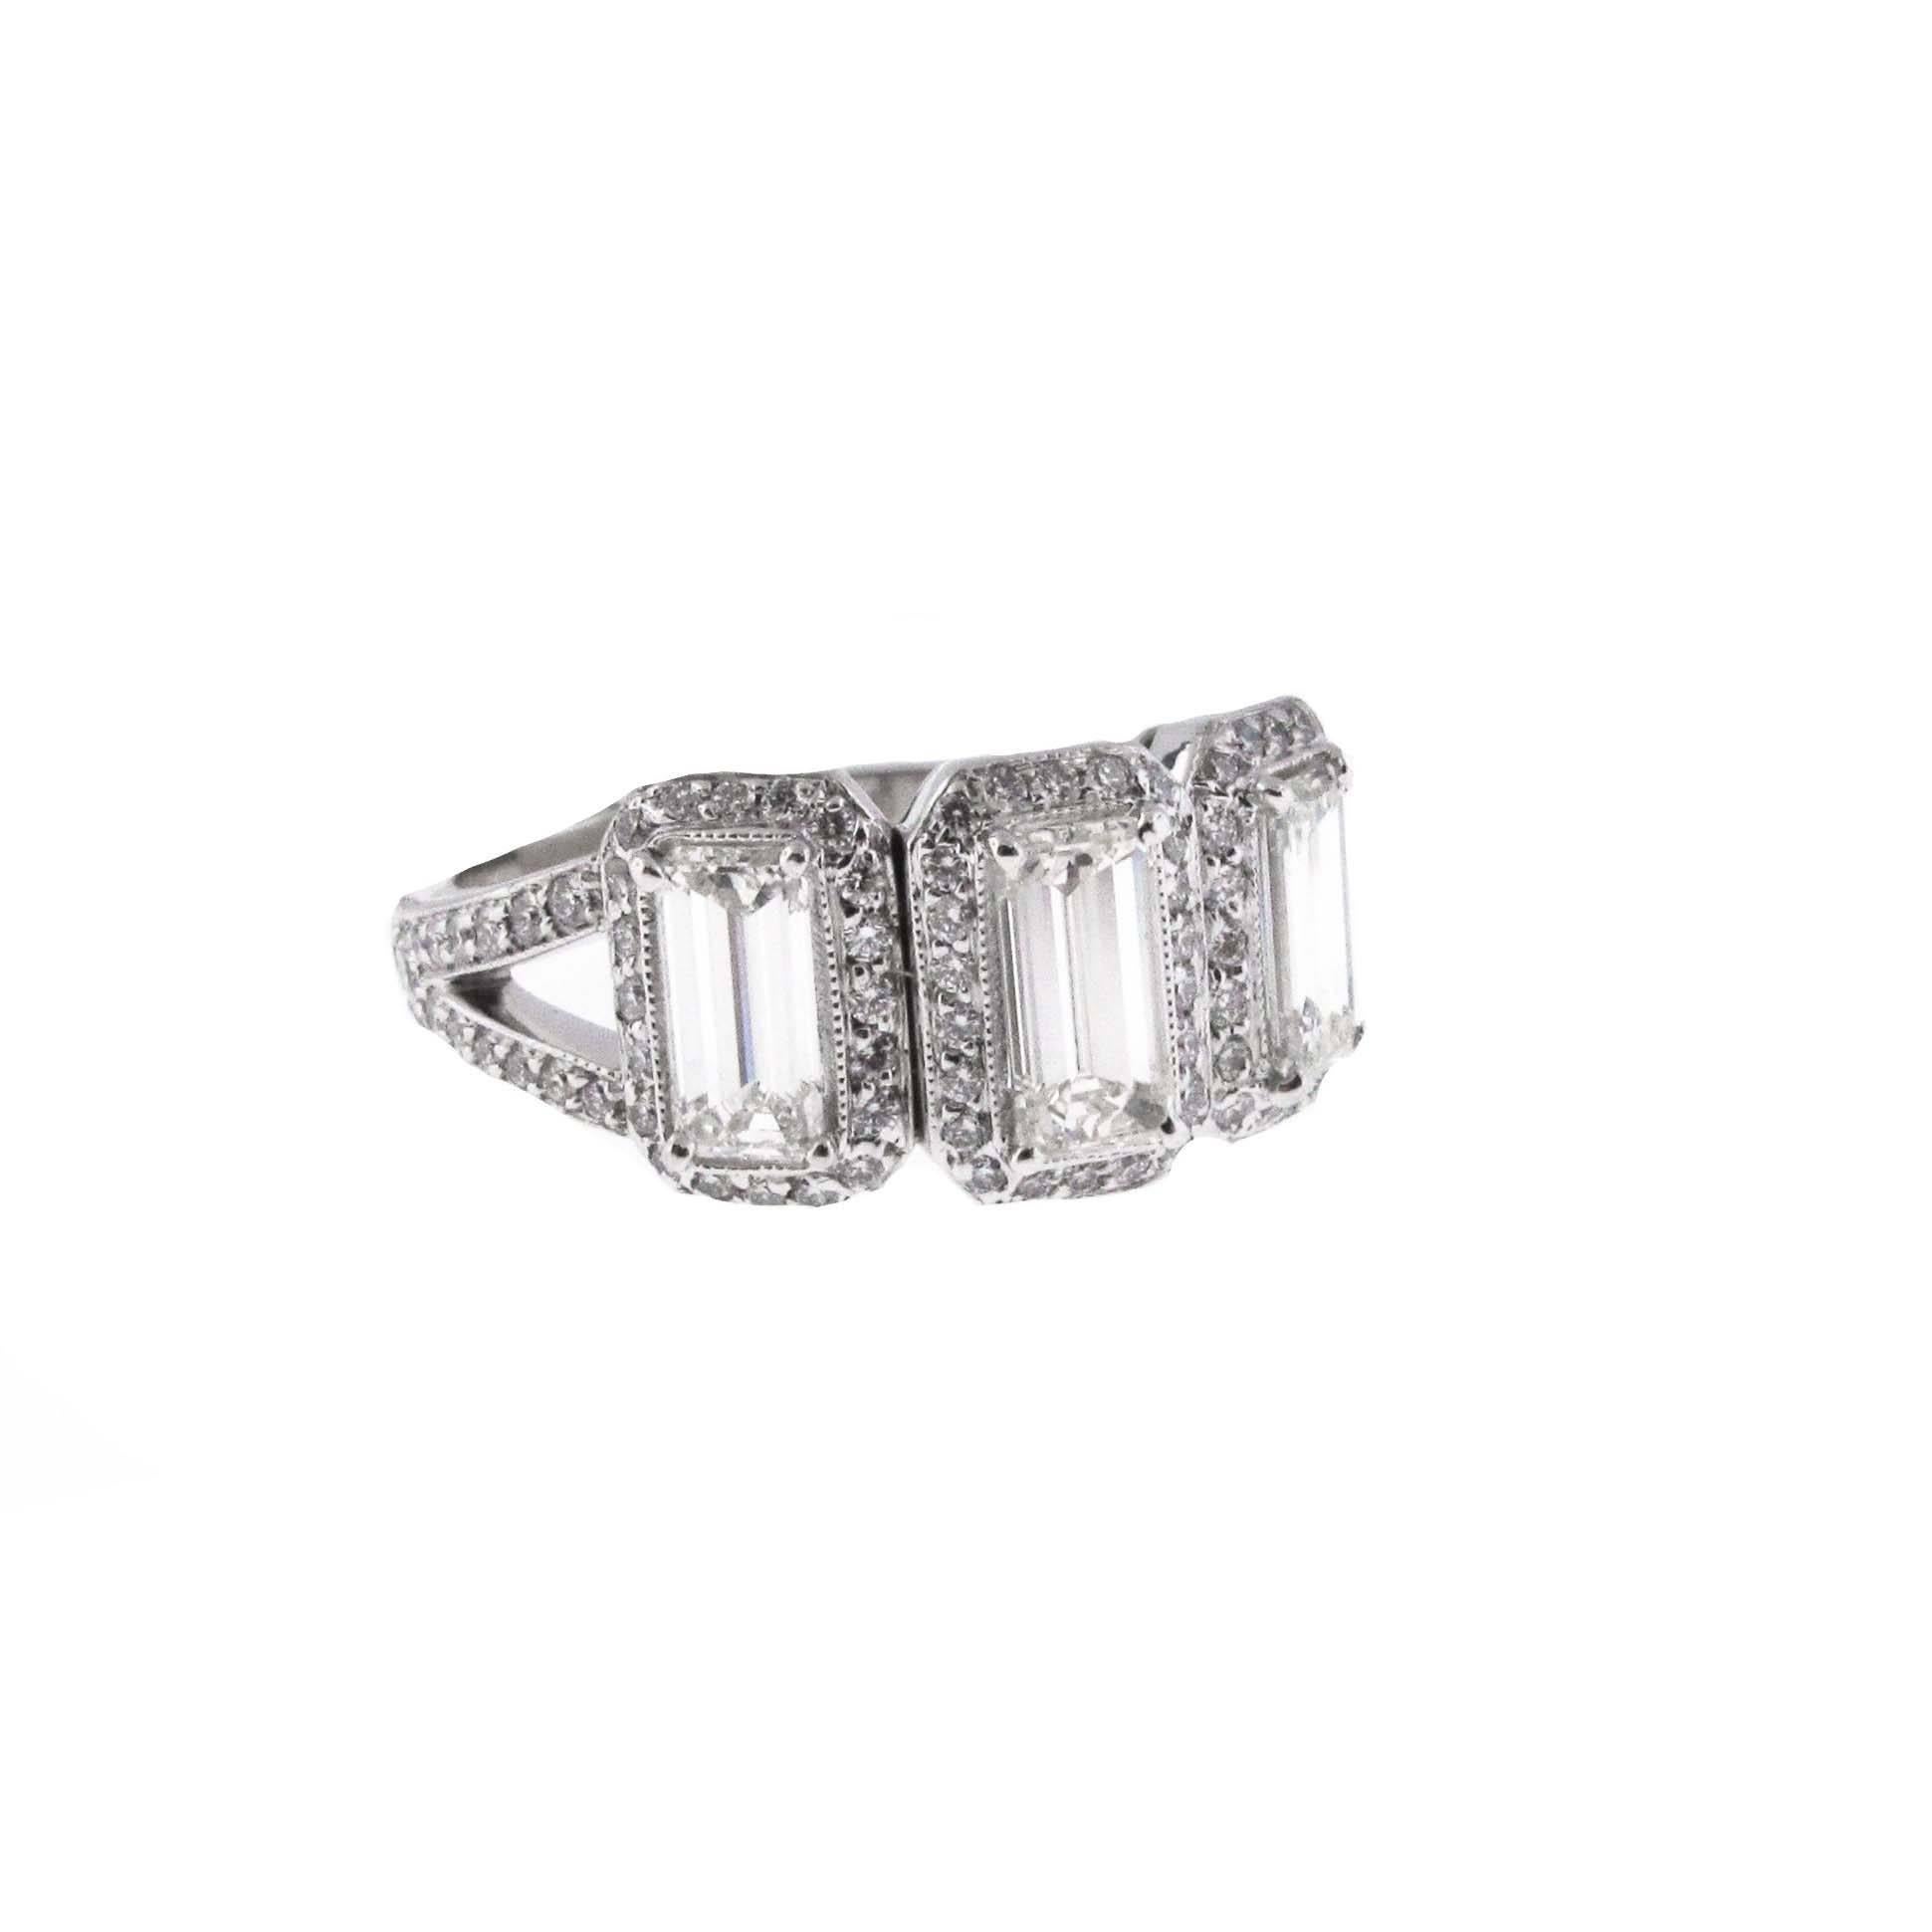 Fantastic look that can be worn as an engagement ring or as a fashion ring. 3 white and clean emerald cut diamonds set among an array of round brilliant diamonds. Each emerald cut is approximately .60 carats for a total of almost 1.80 carats. This